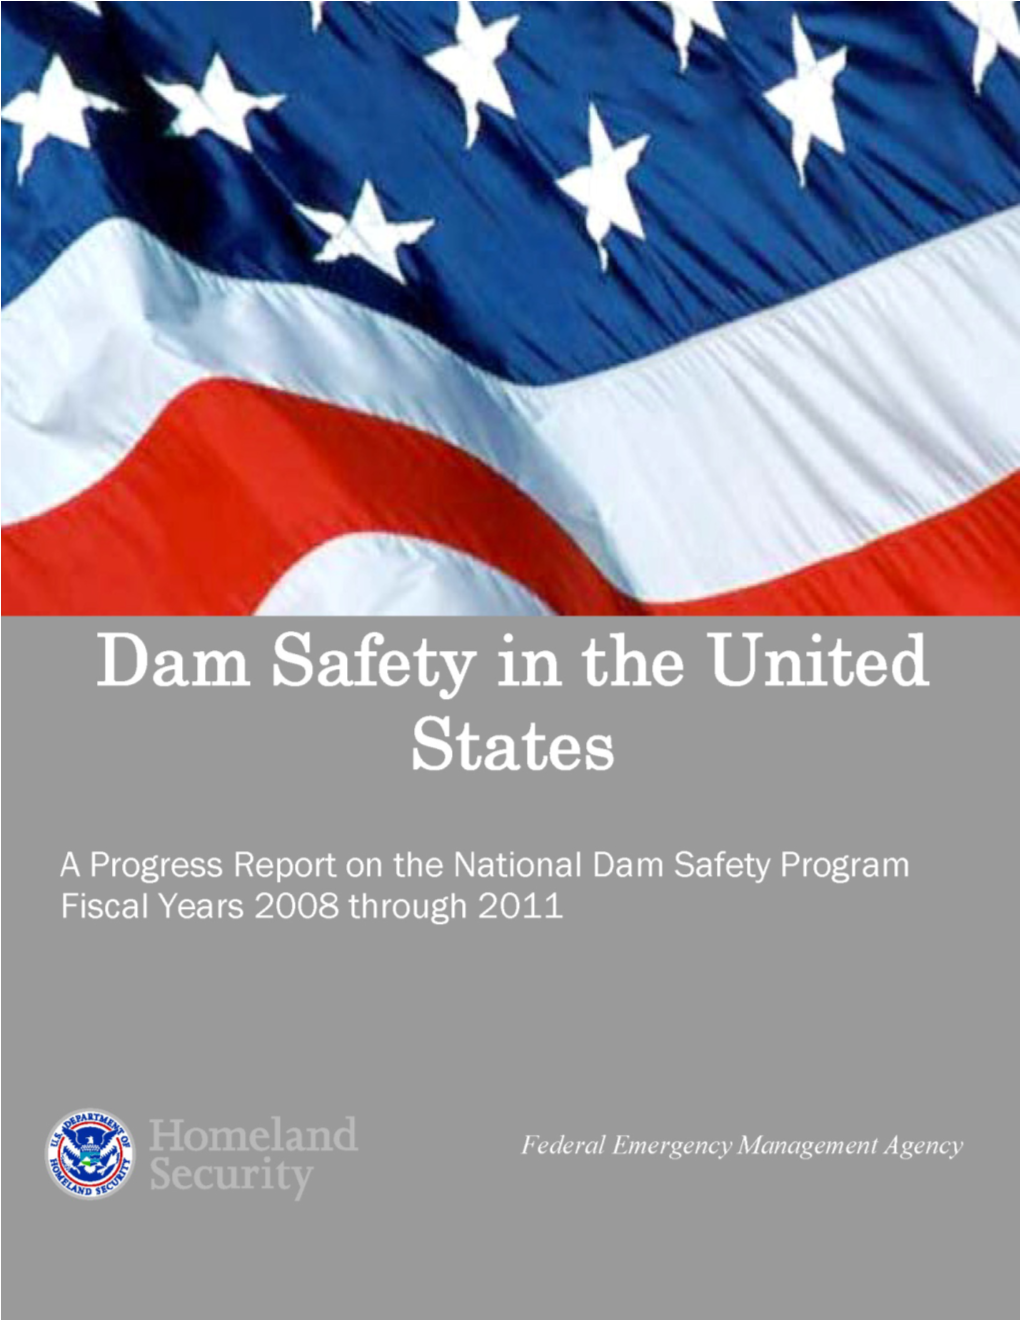 Dam Safety in the United States: a Progress Report on the National Dam Safety Program Fiscal Year 2008 to 2011.”